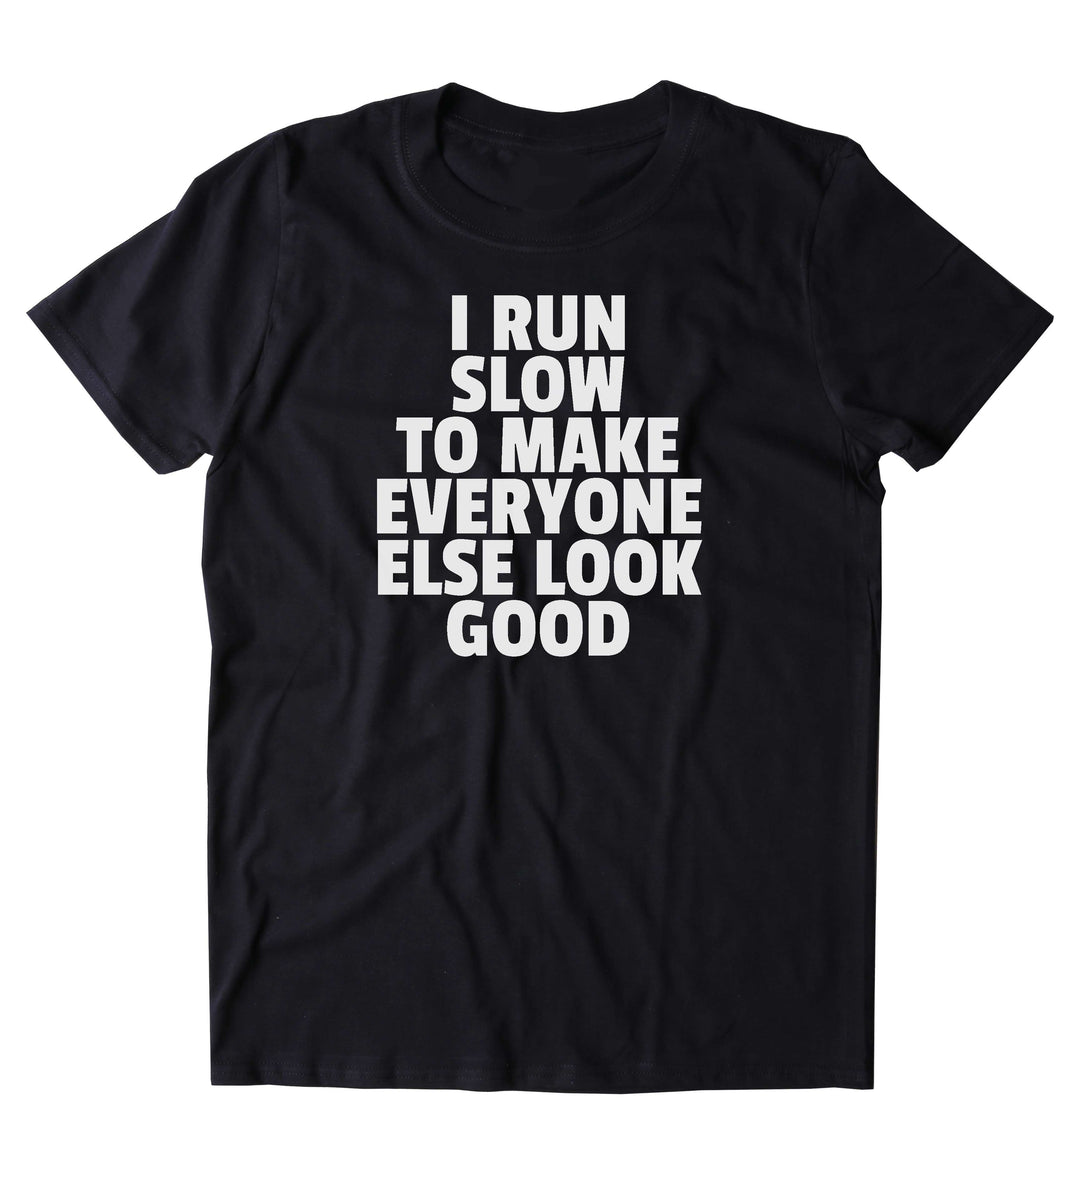 I Run Slow To Make Everyone Else Look Good Shirt Running Work Out ...